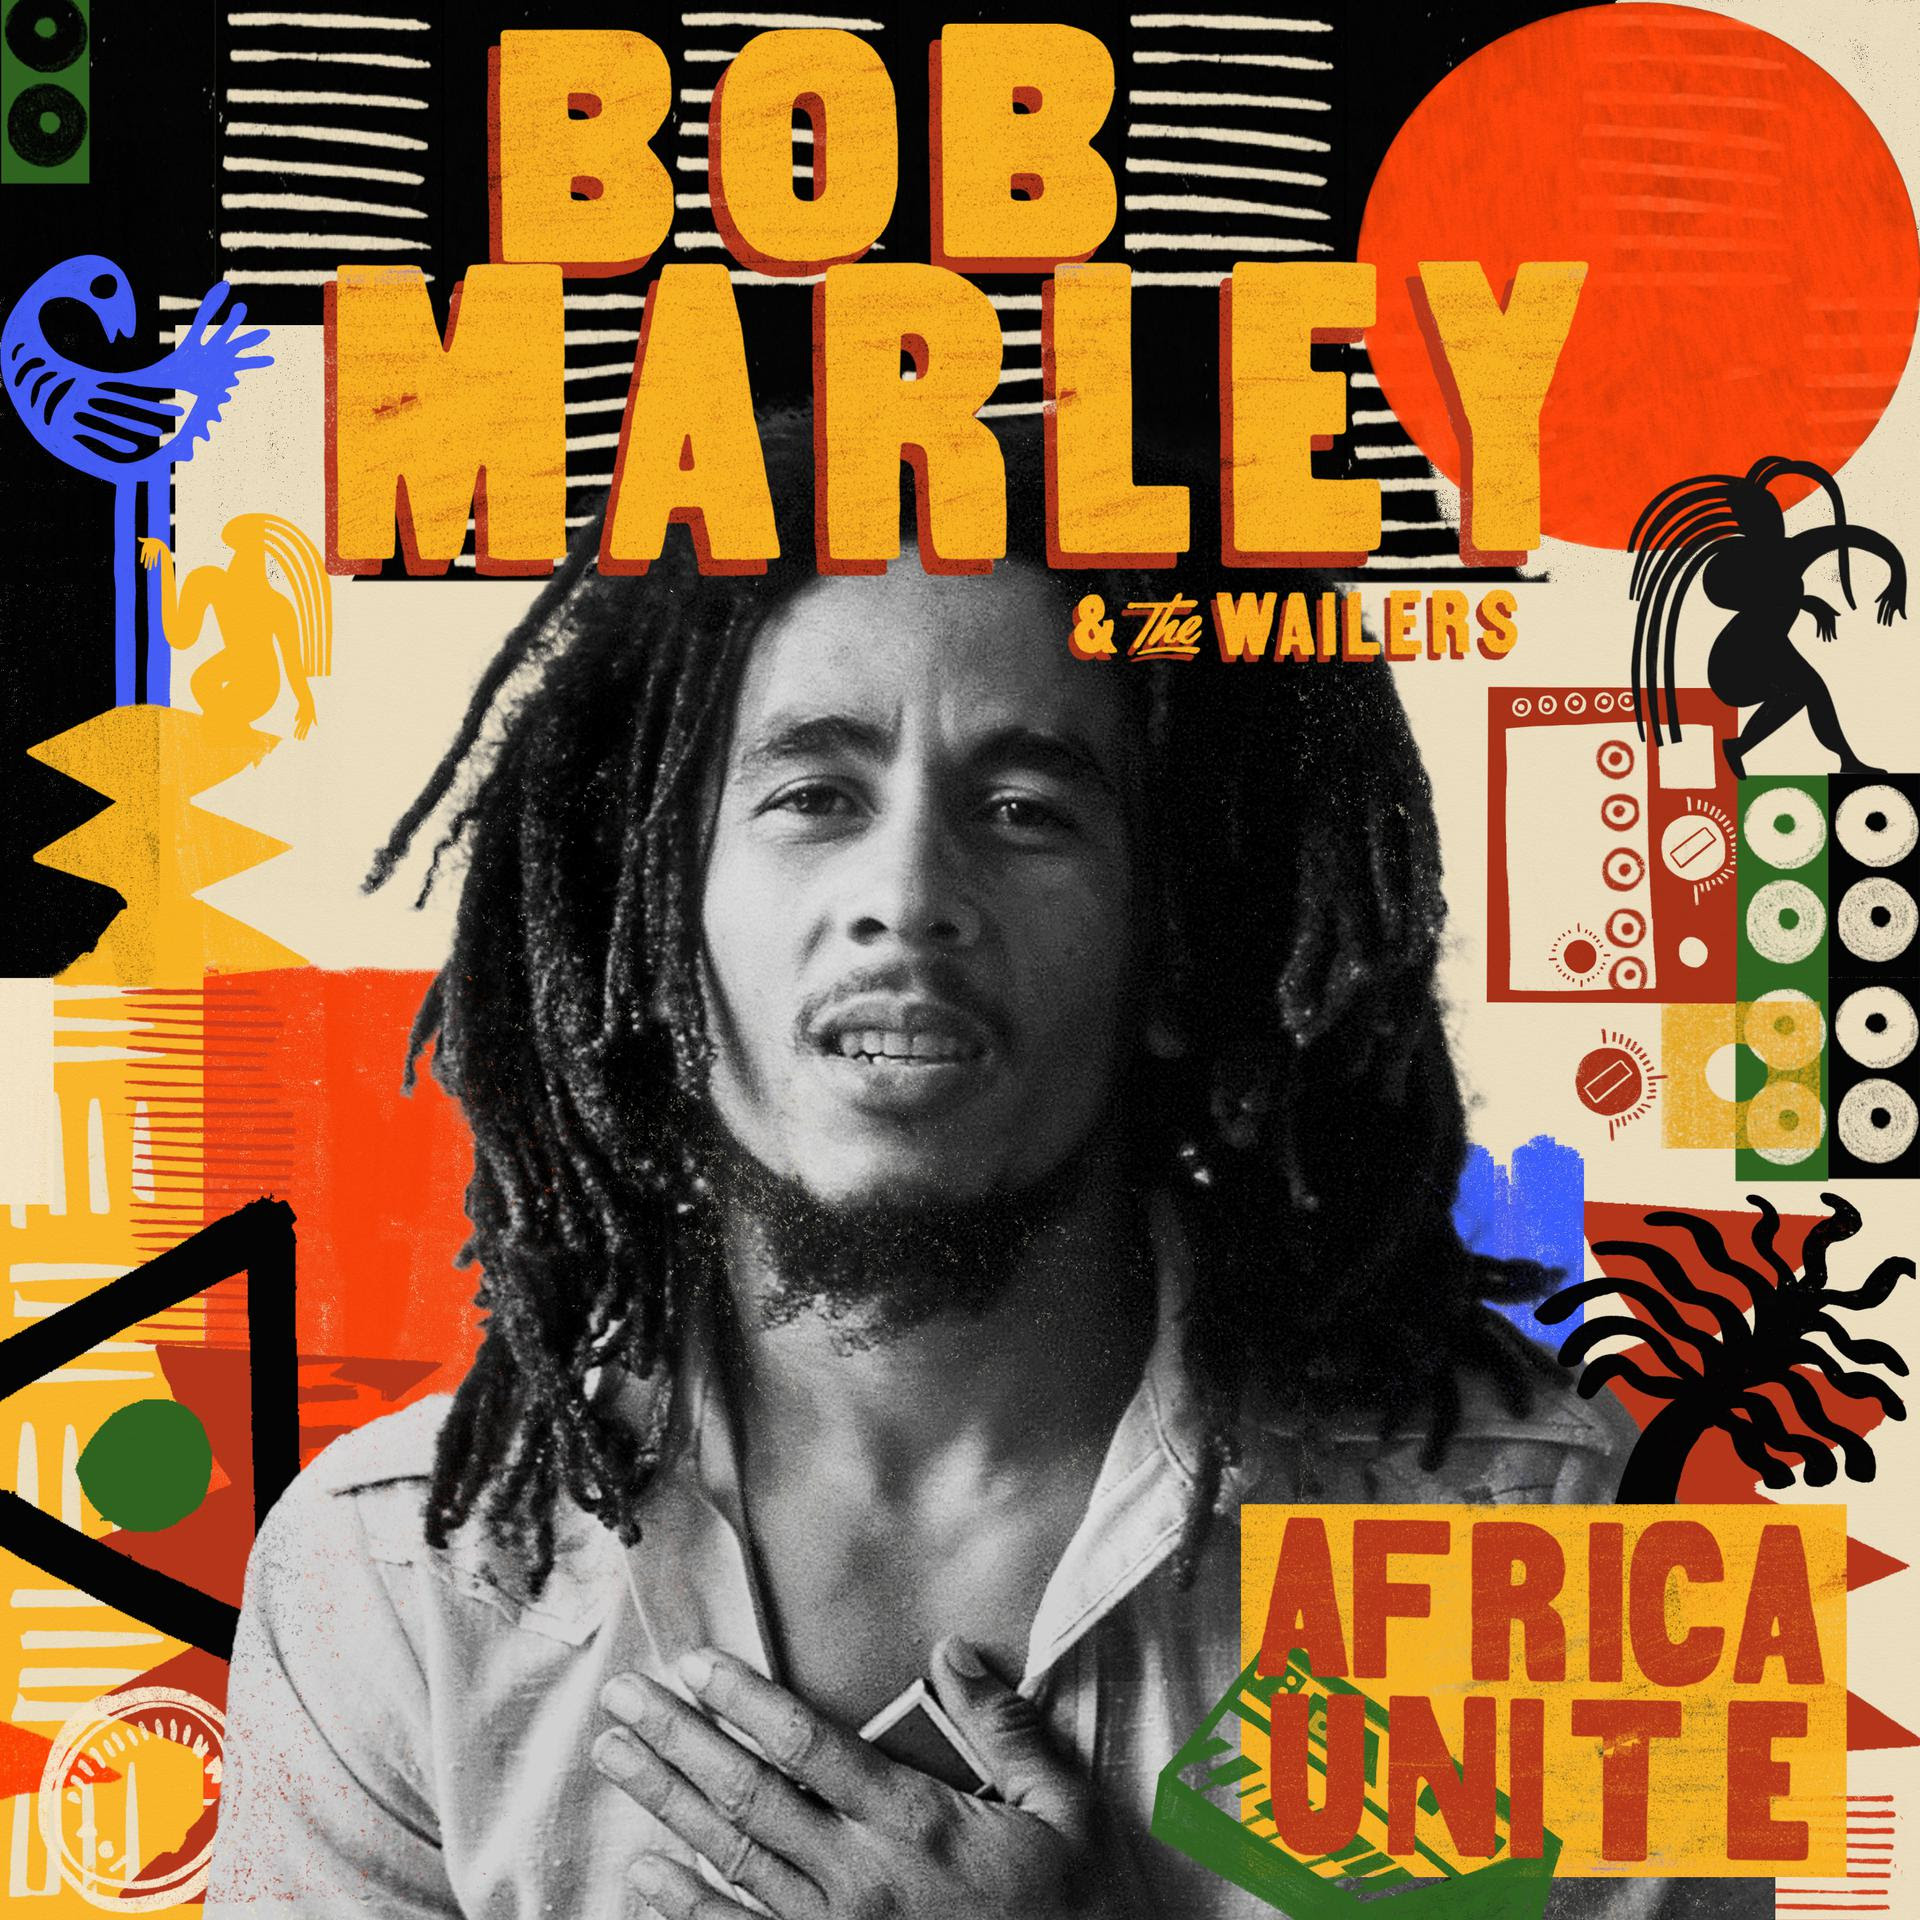 BOB MARLEY & THE WAILERS RELEASES POSTHUMOUS ALBUM ‘AFRICA UNITE’ - AVAILABLE NOW